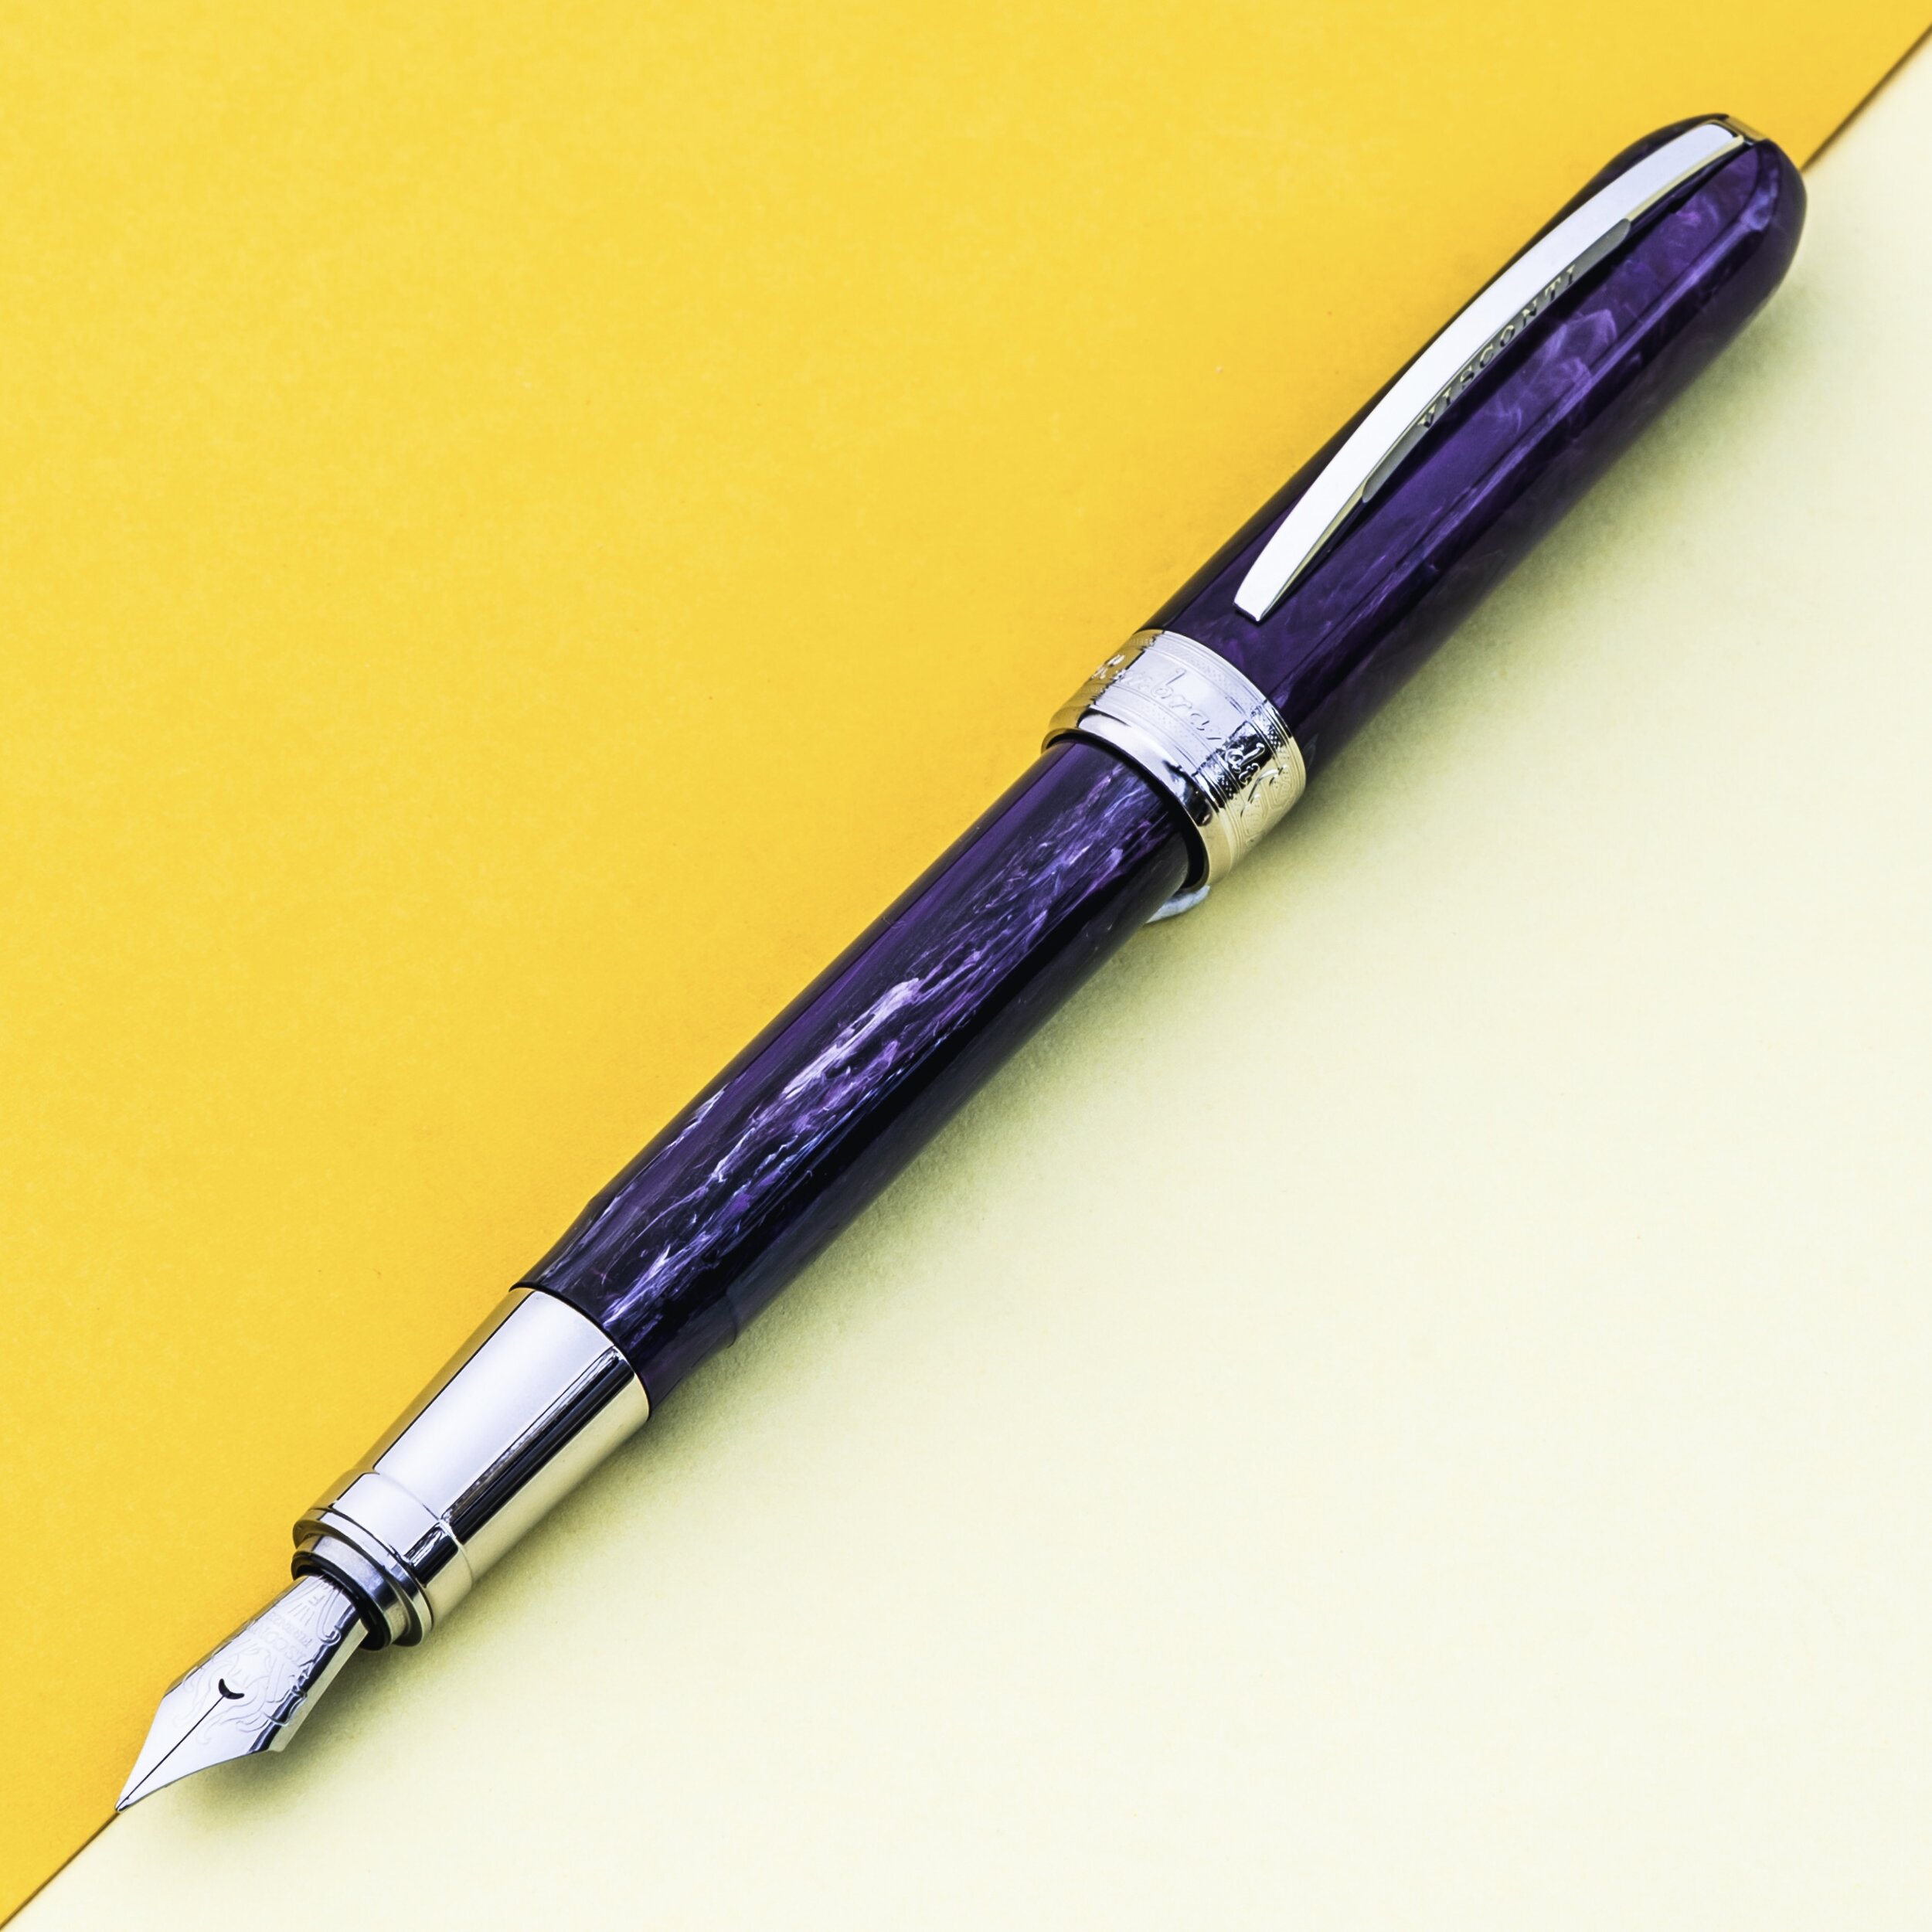 vanness pens coupon code